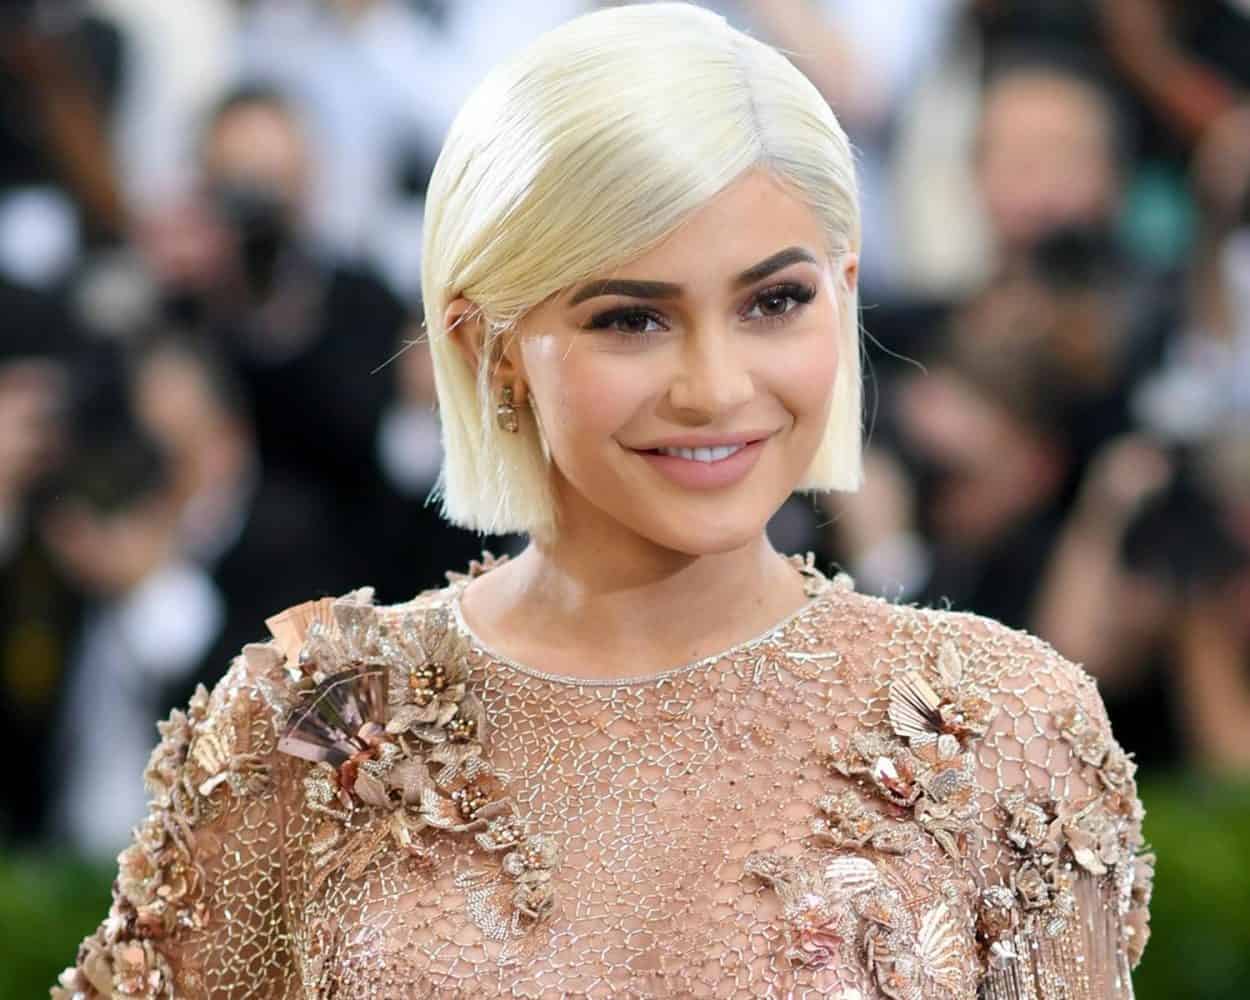 The Making of a Billionaire: How Kylie Jenner Parlayed Her Makeup Talents Into an Unstoppable Empire